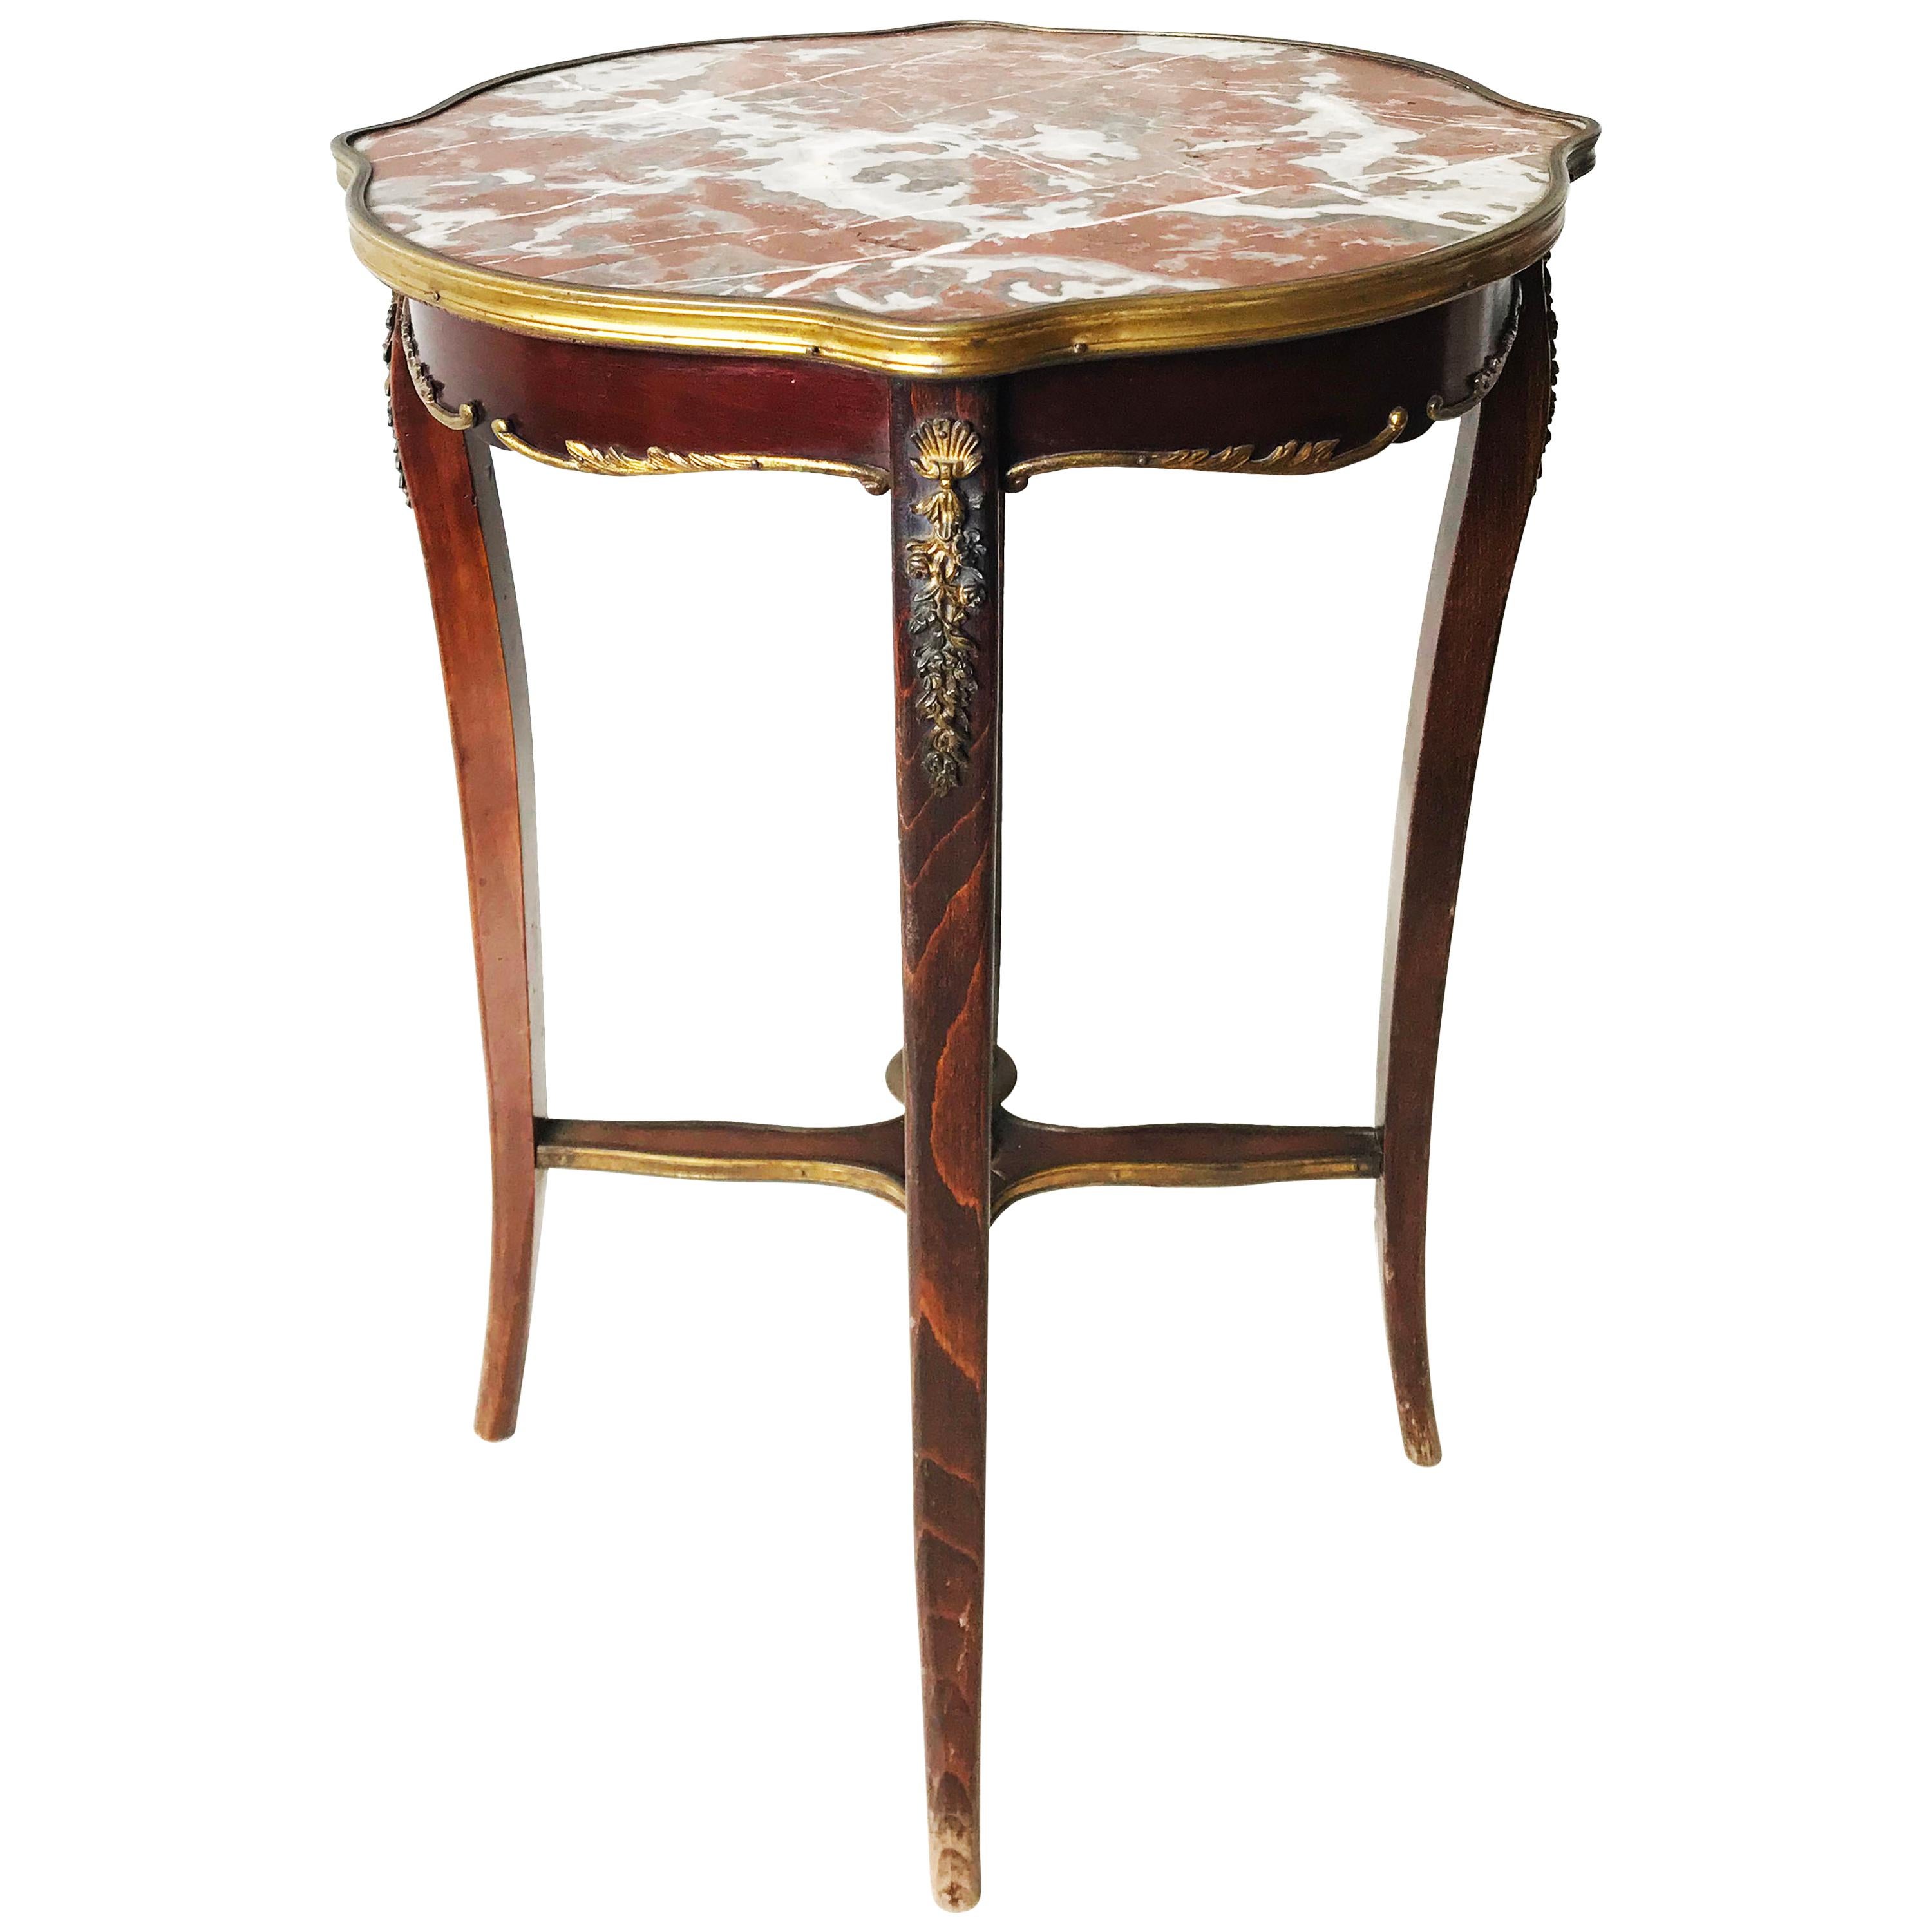 Louis XV Style Marble-Top Guéridon, Center Table Walnut Wood & Griotte Marble